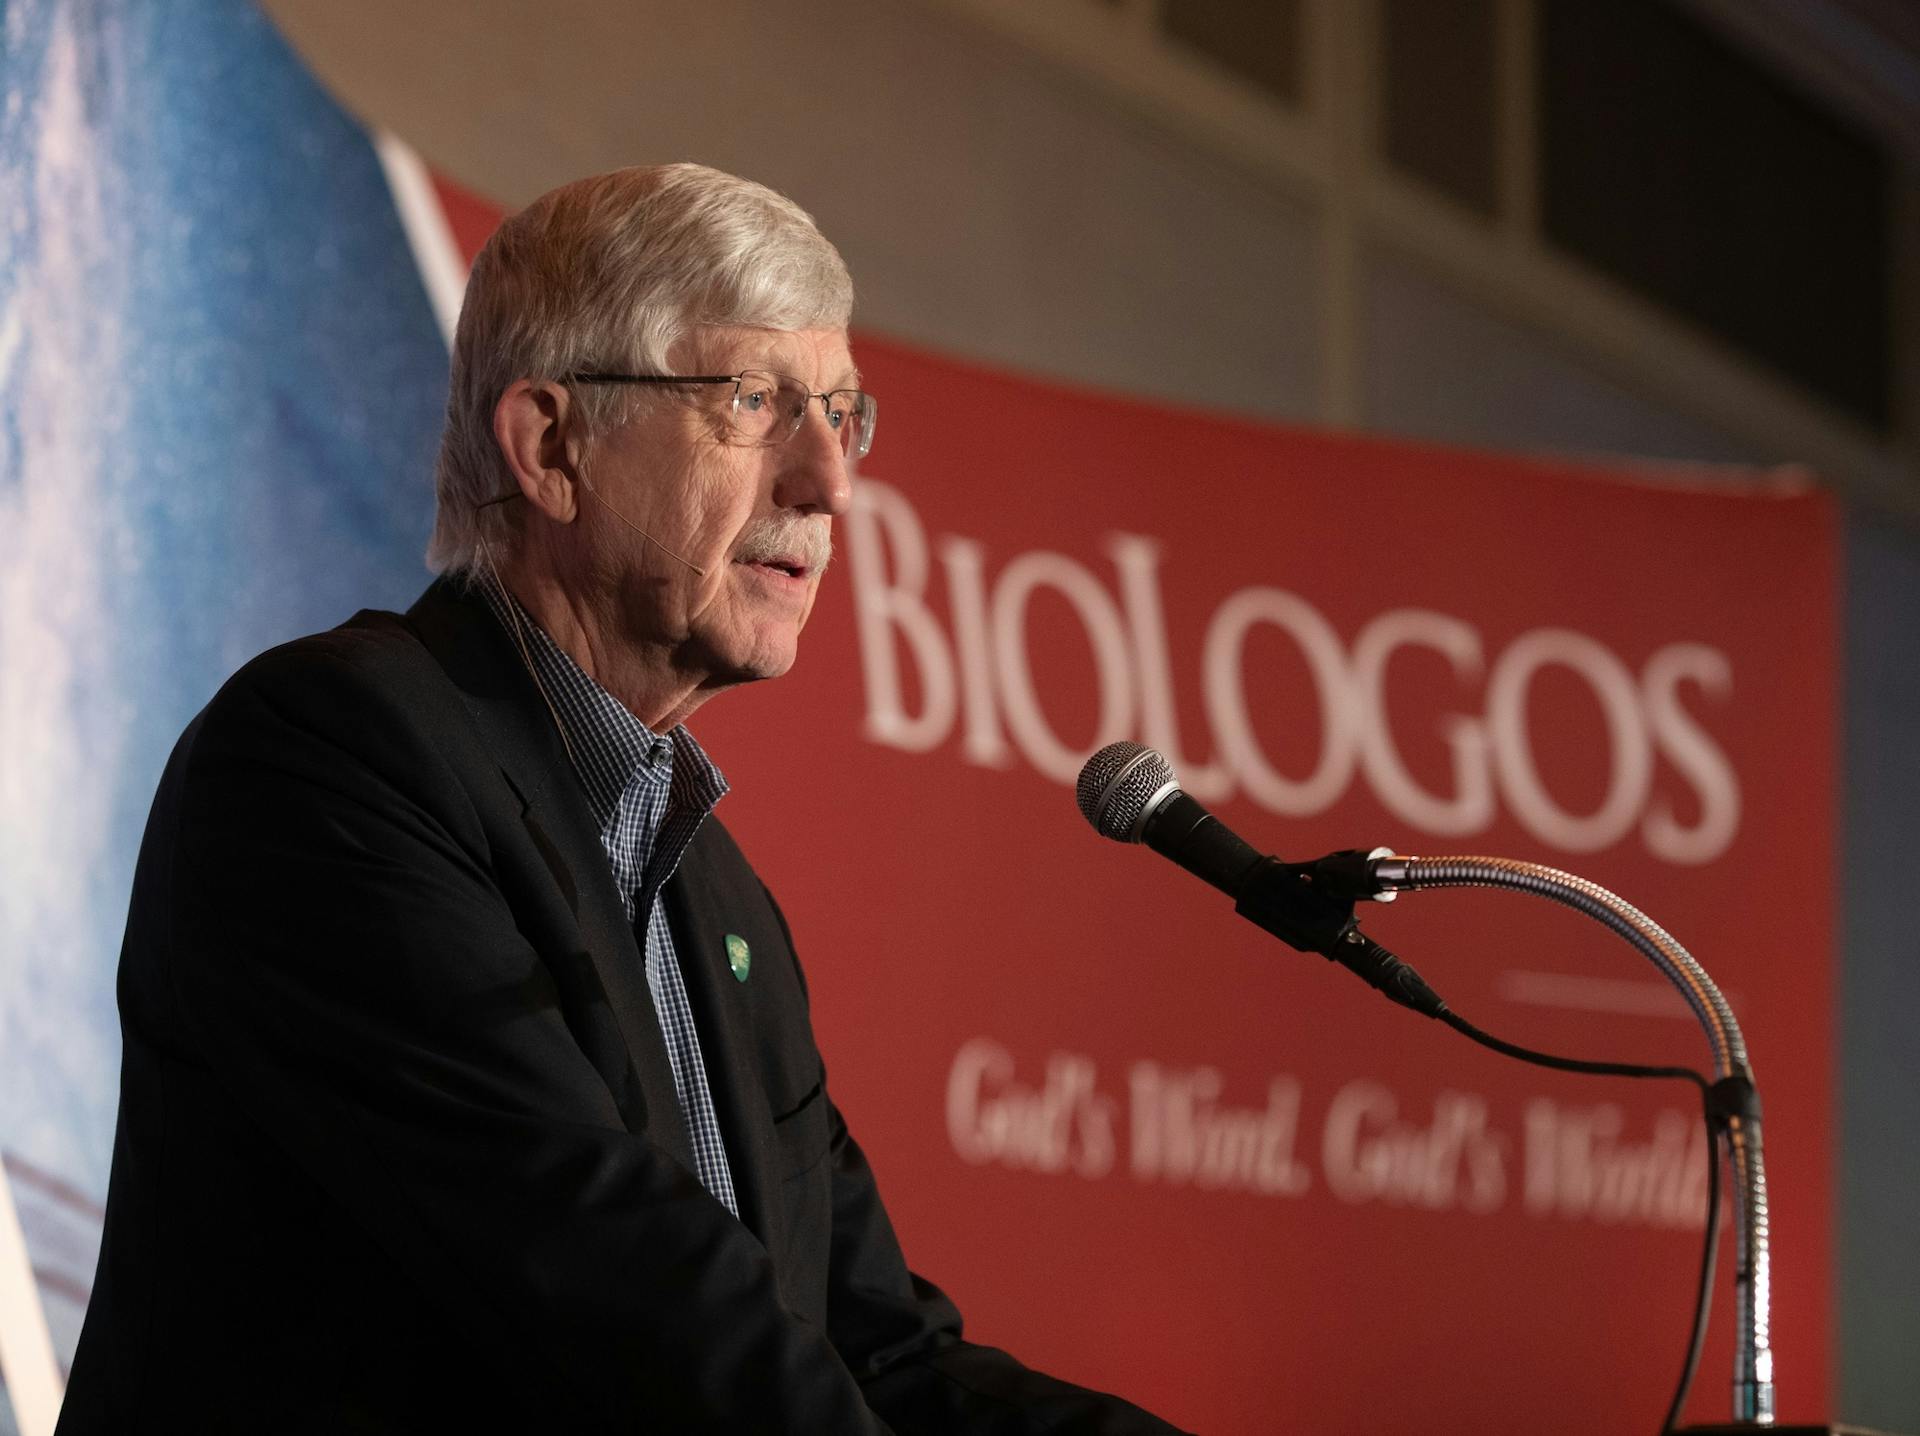 Francis Collins speaks at the 2019 BioLogos Conference